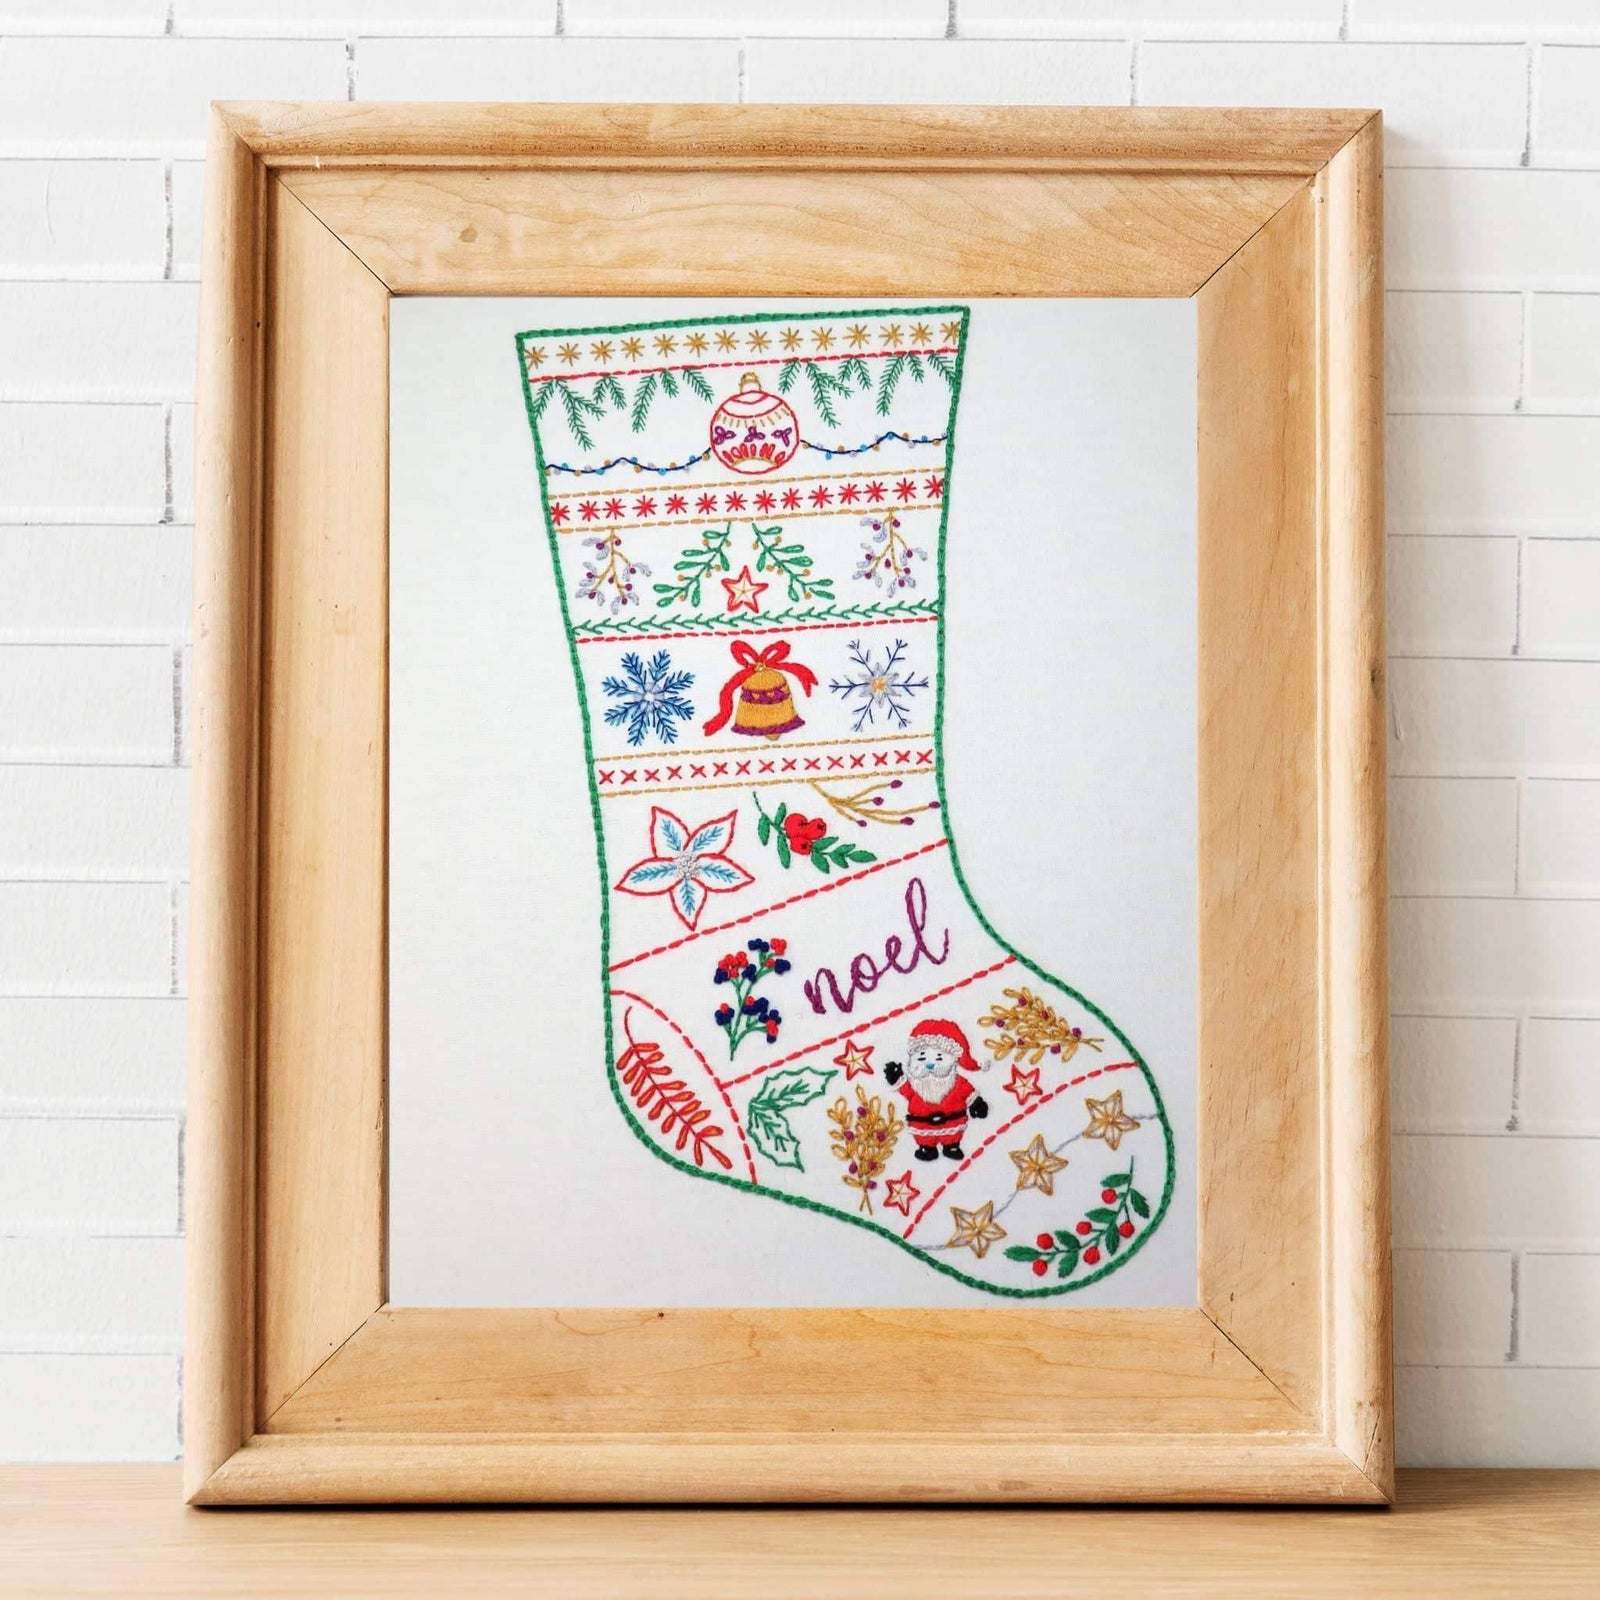 Christmas Stocking Hand Embroidery Pattern , PDF Download , StitchDoodles , christmas, embroidery hoop kit, Embroidery Kit, embroidery kit for adults, embroidery kit fro beginners, embroidery kits for adults, embroidery kits for beginners, modern embroidery kits, pdf , StitchDoodles , shop.stitchdoodles.com